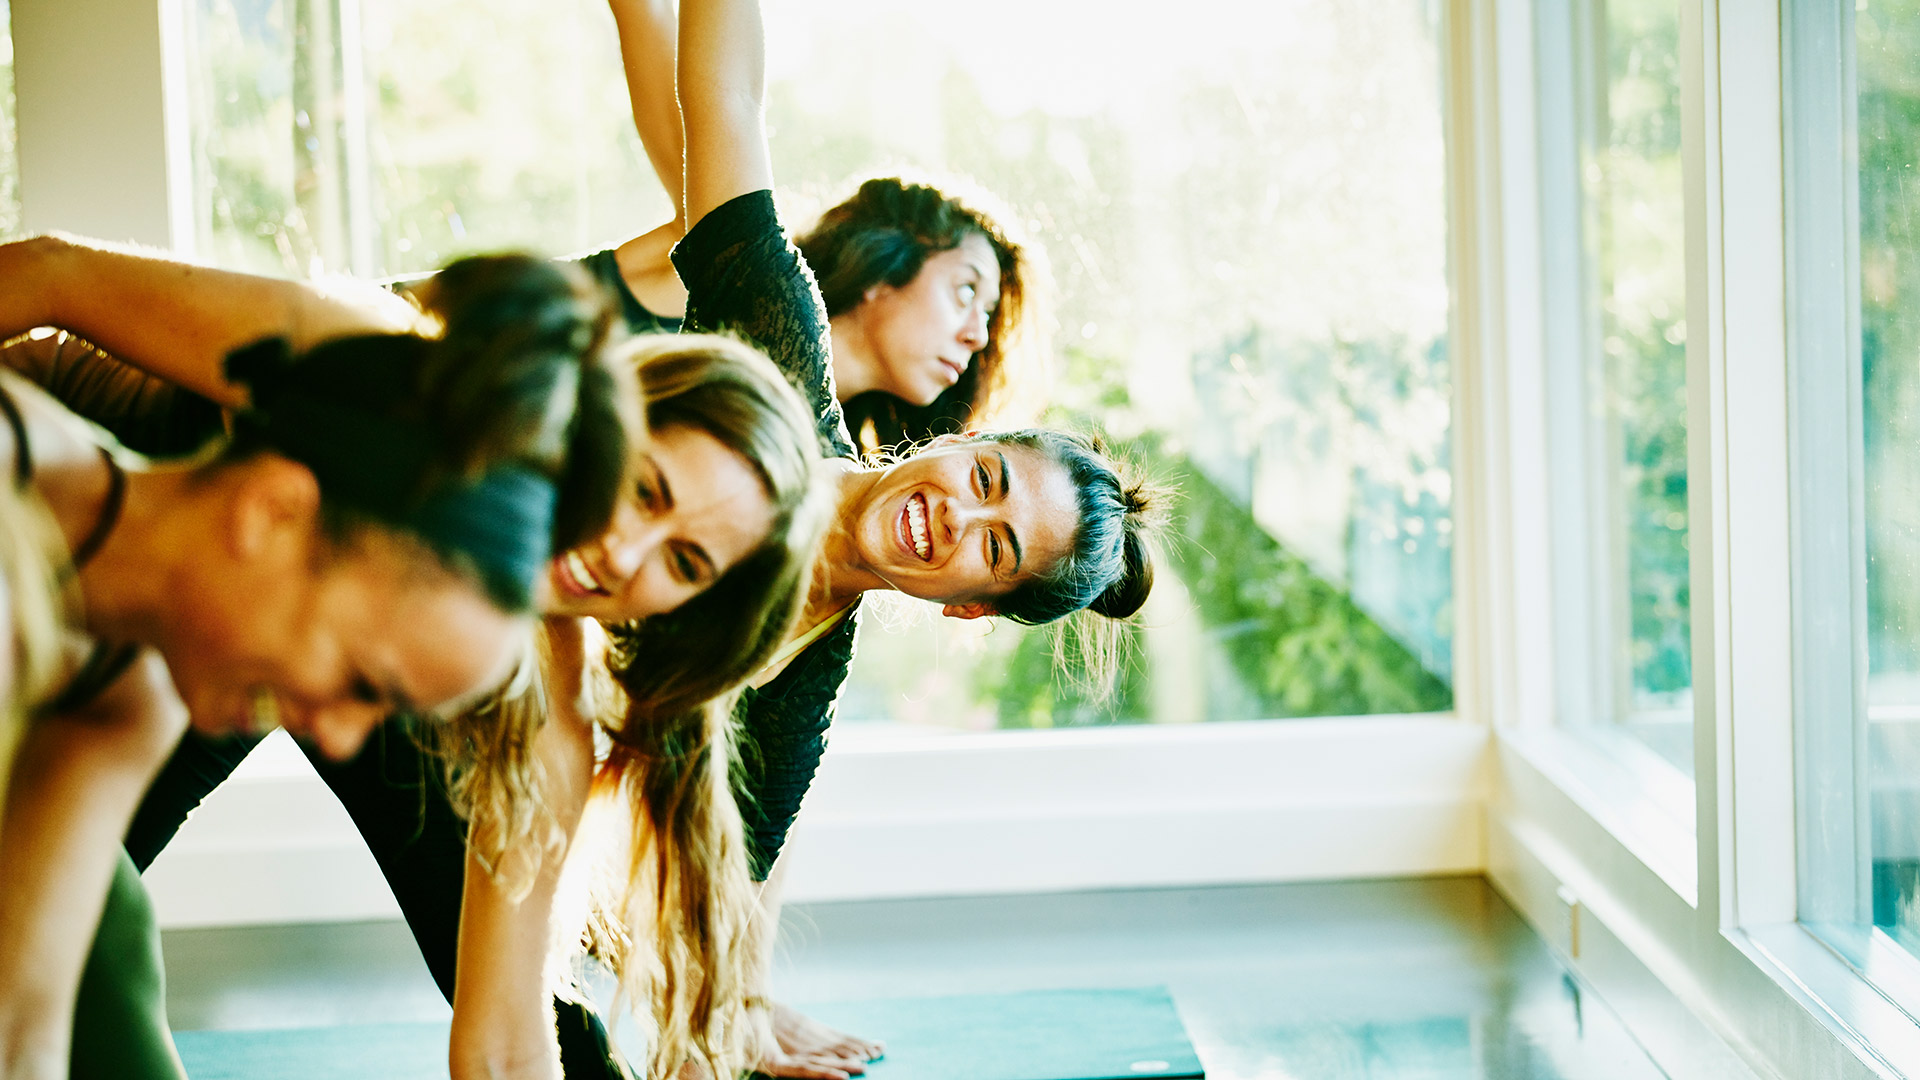 Smiling woman laughing with friends during yoga class in studio